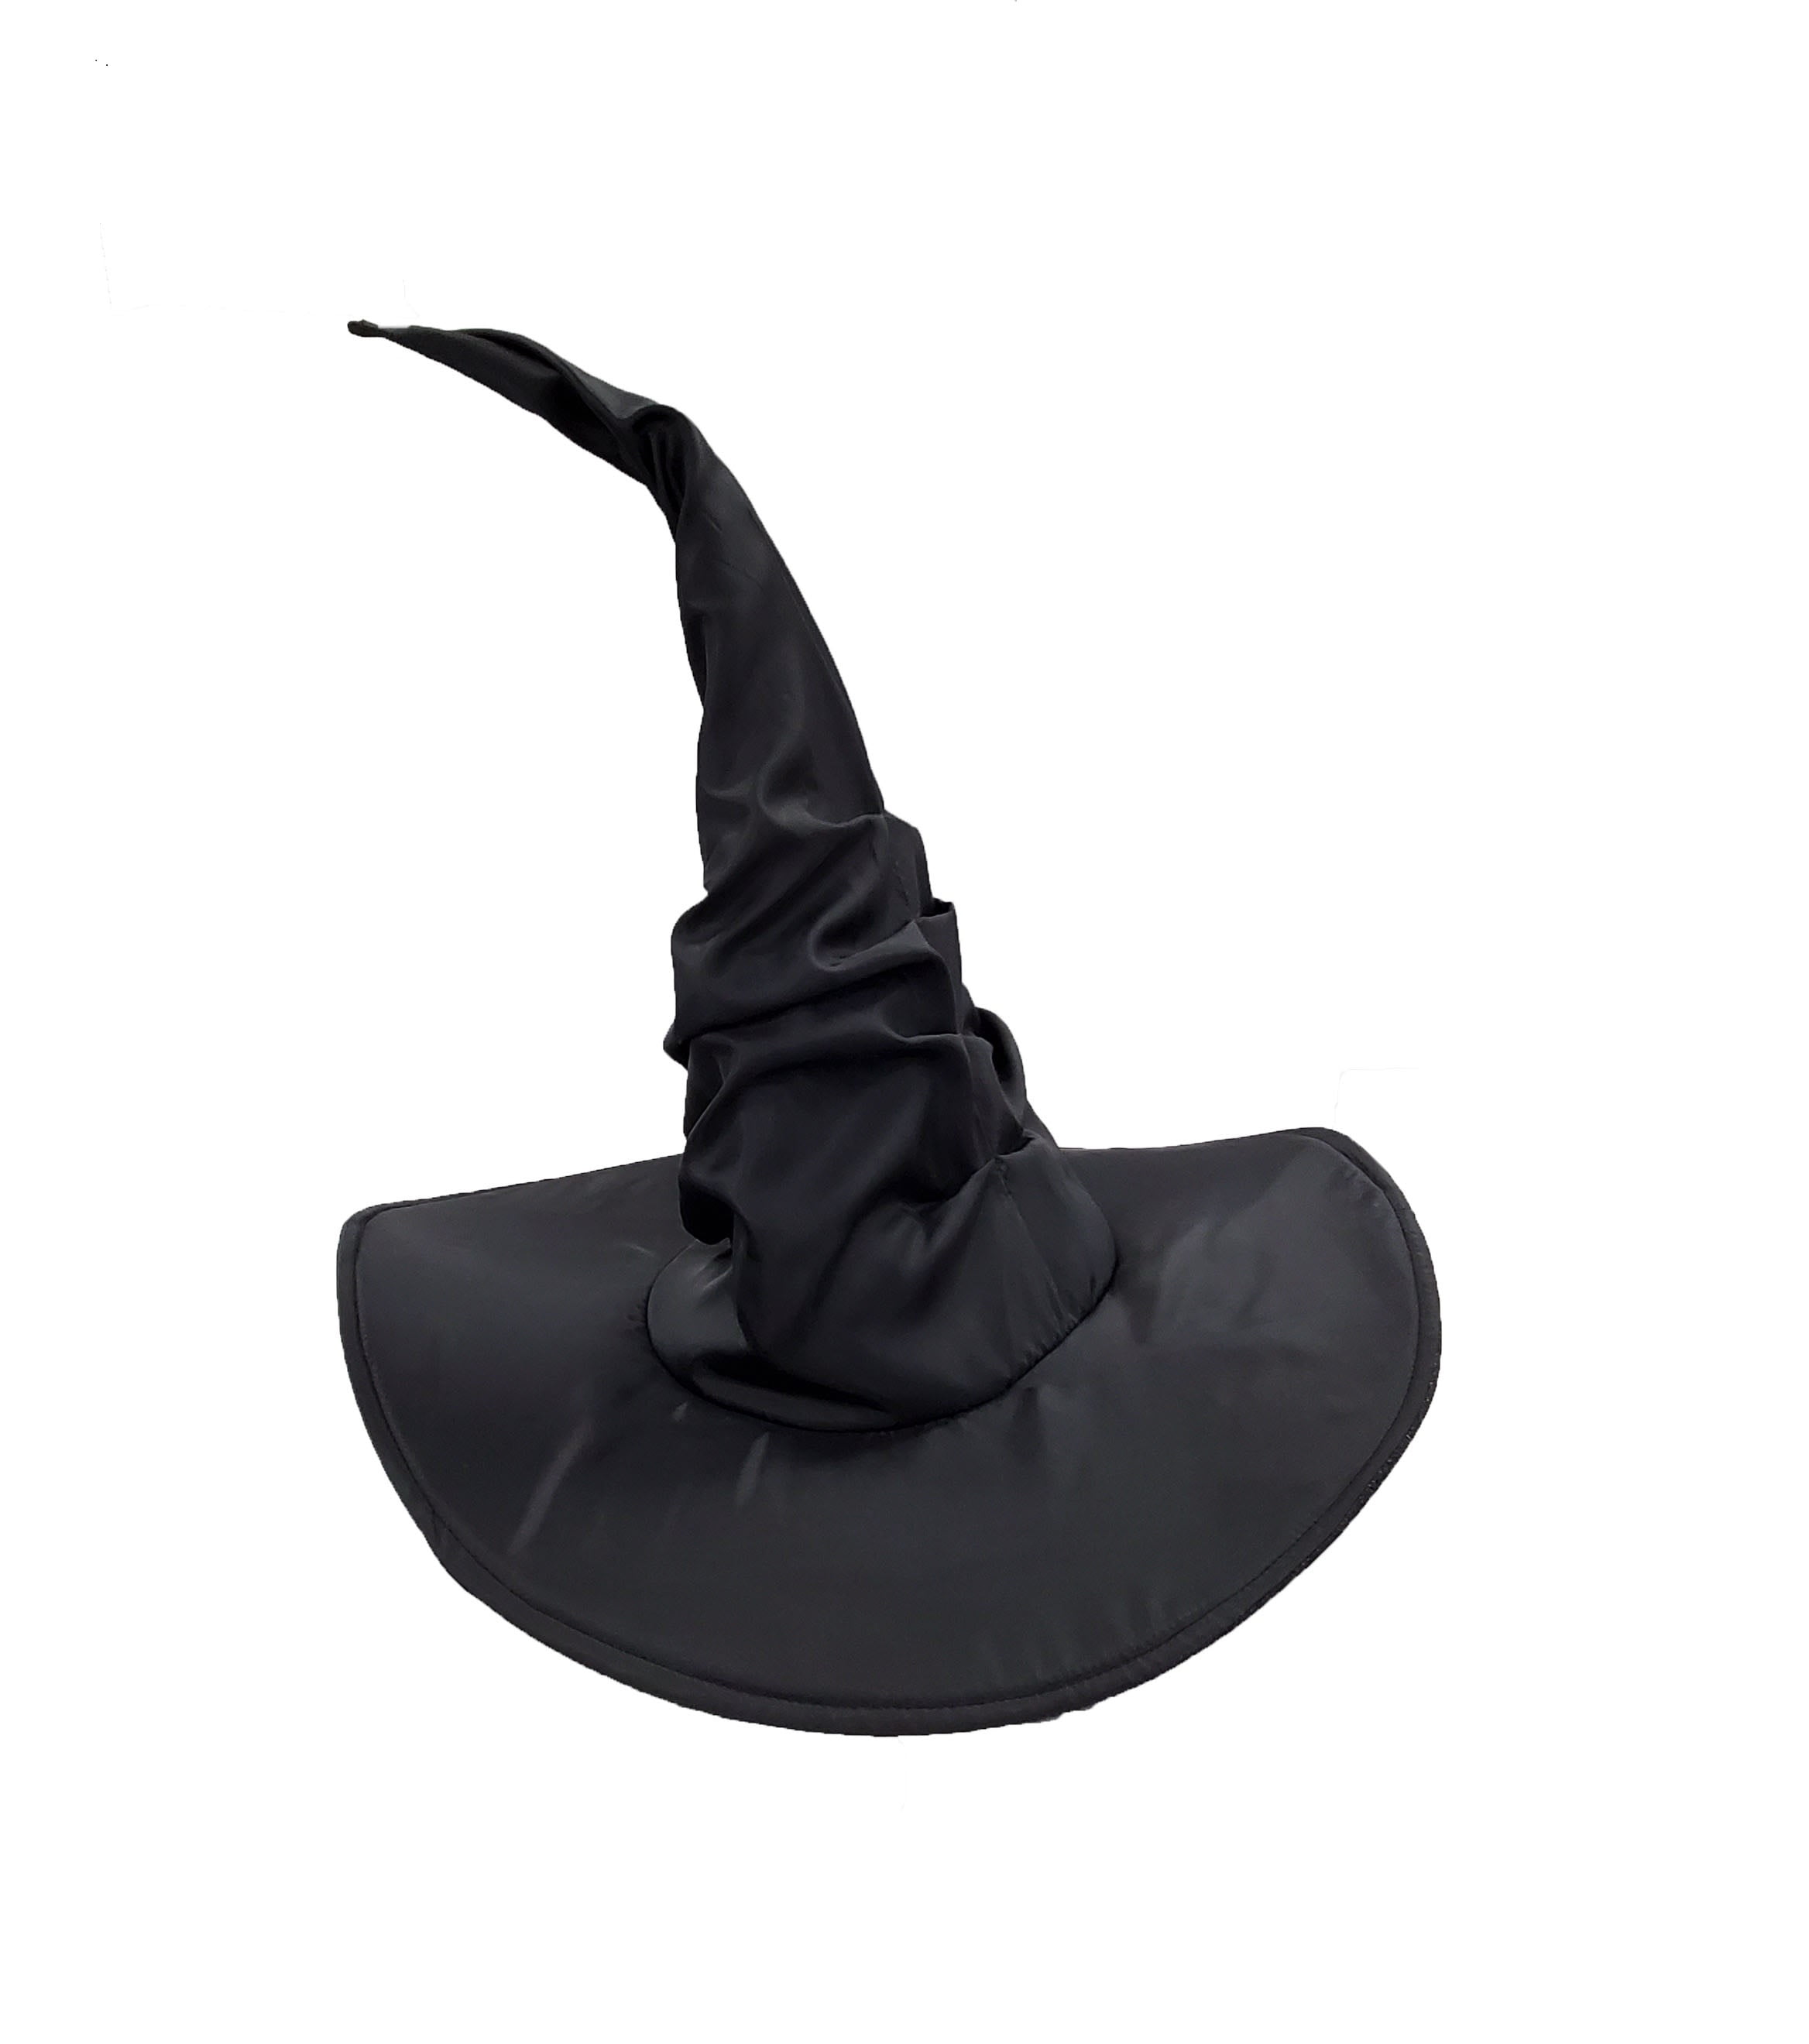 Witches Hat Halloween Fancy Dress Tall Black Ladies Costume Twisty Accessory 